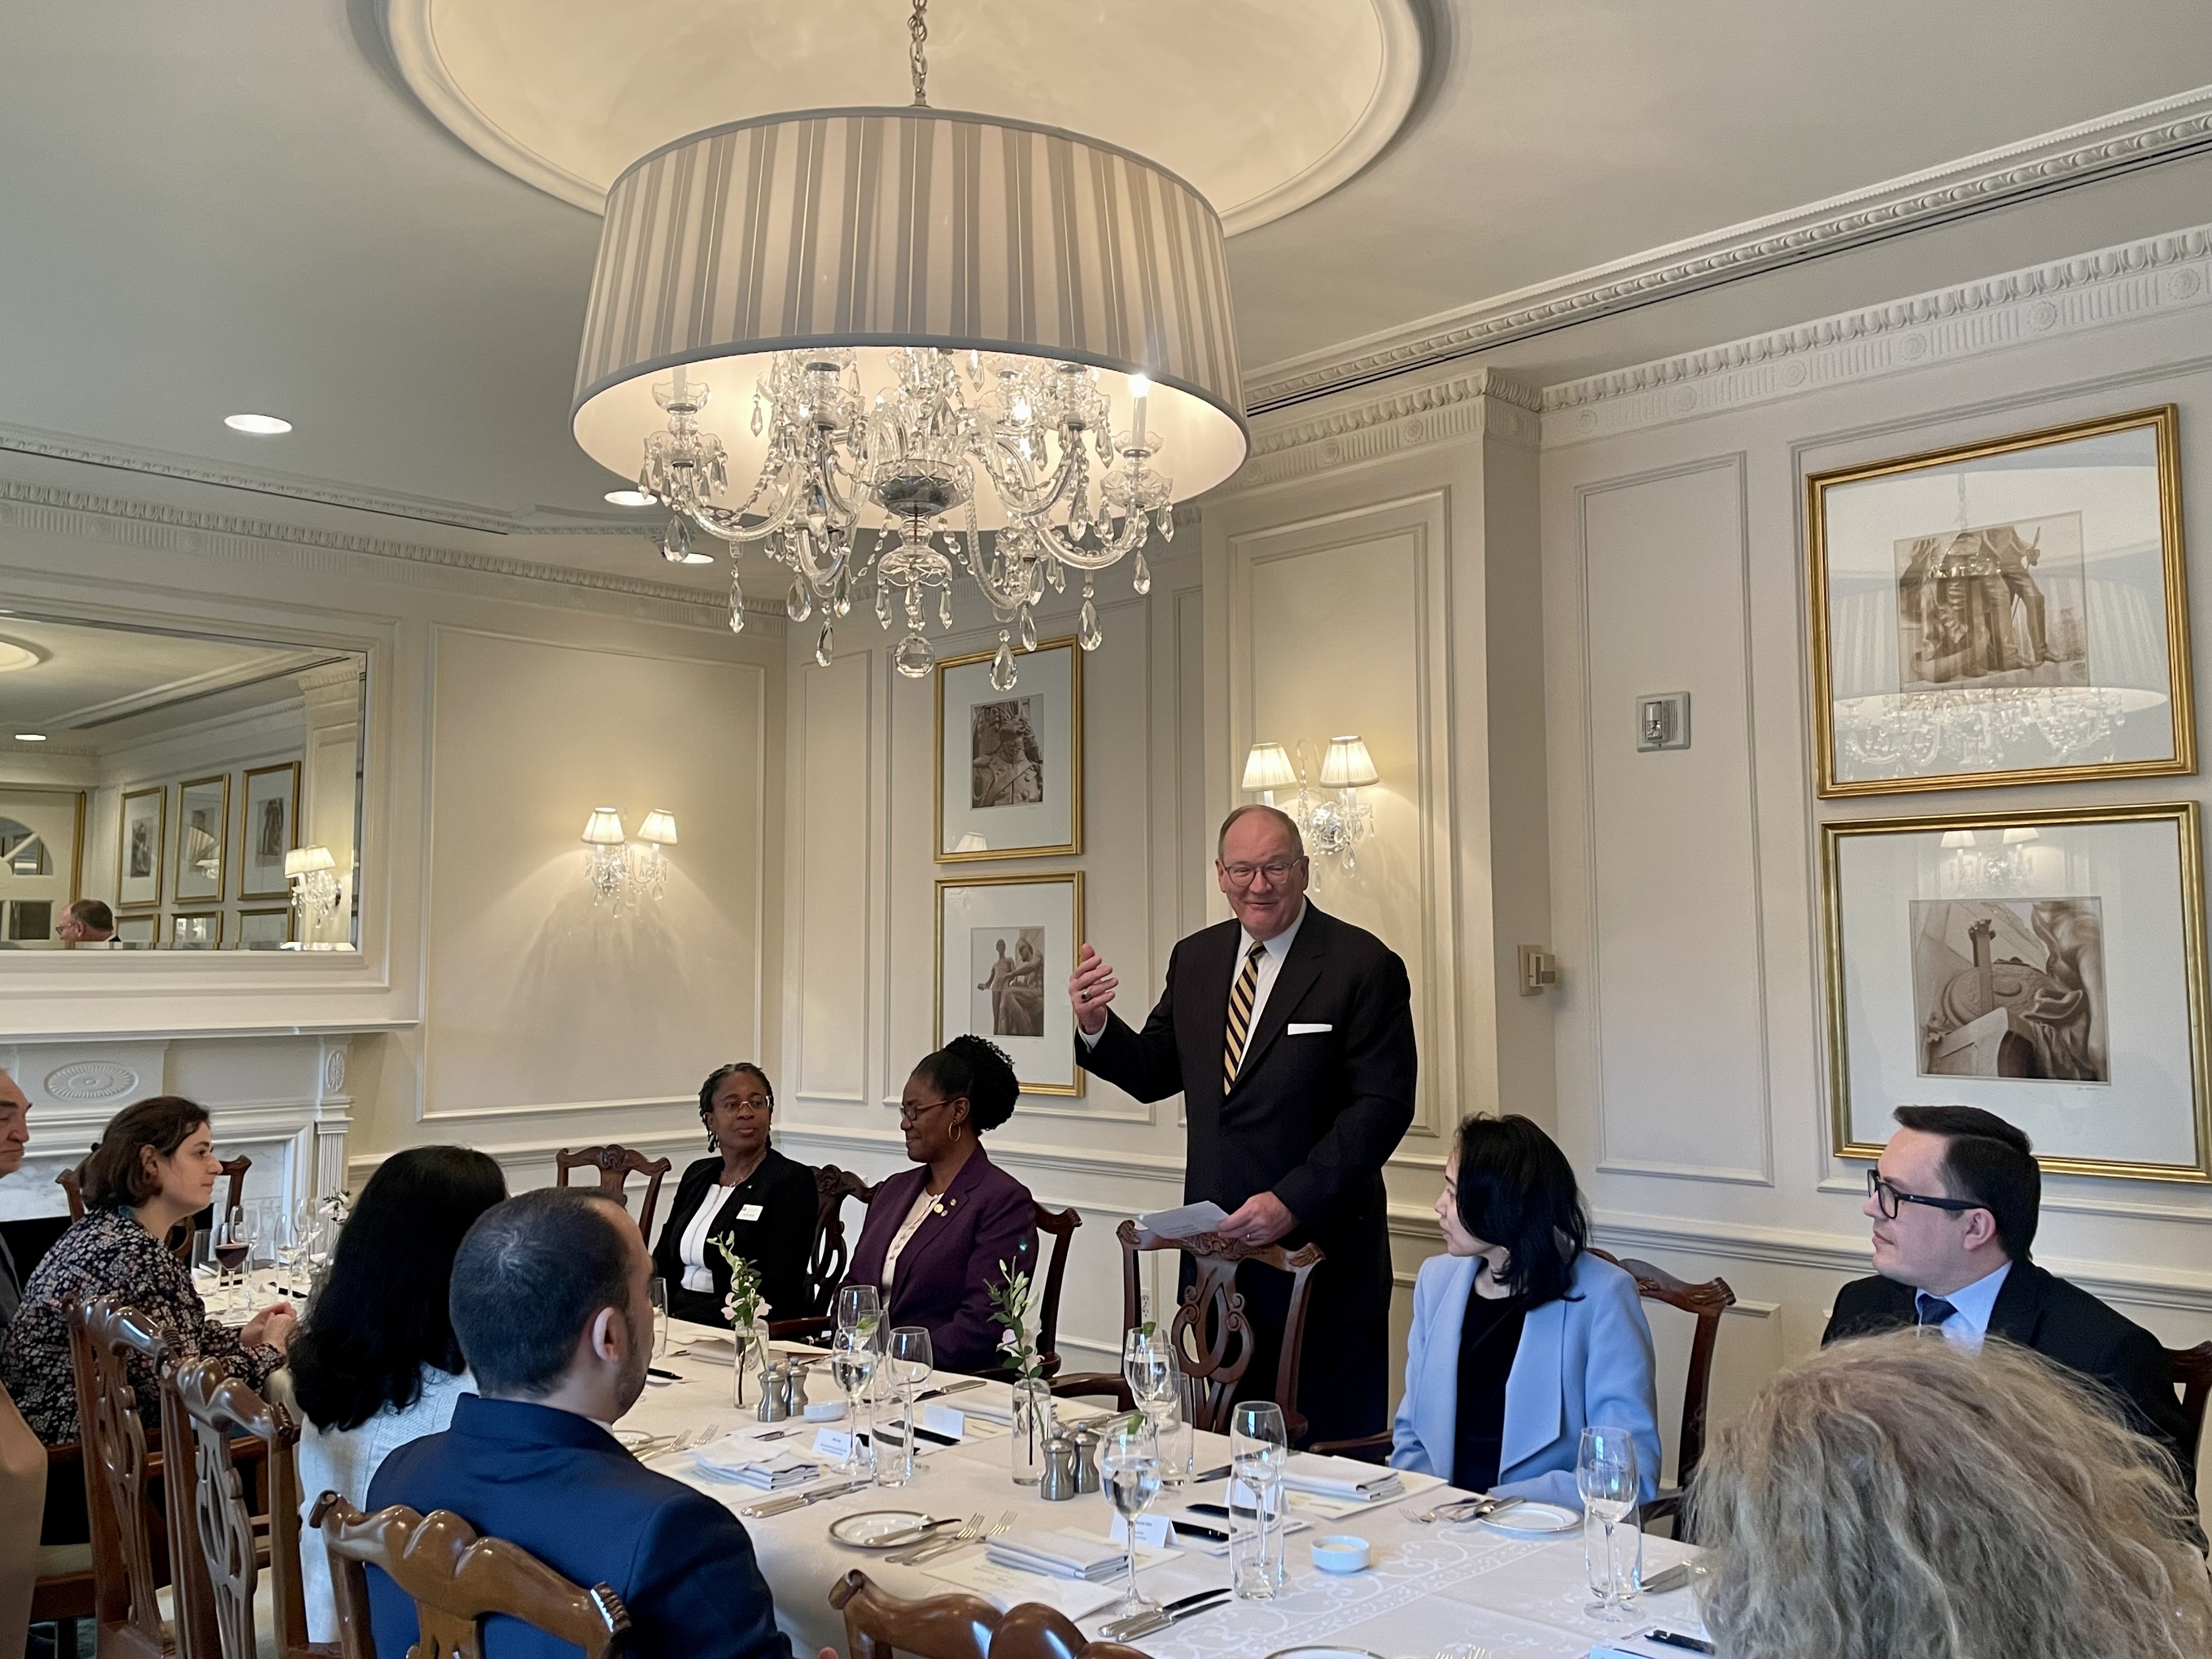 Ambassador Michael Polt speaks to a group of diplomats during the April Diplomatic Roundtable with Minu Ipe on the Future of Higher Education